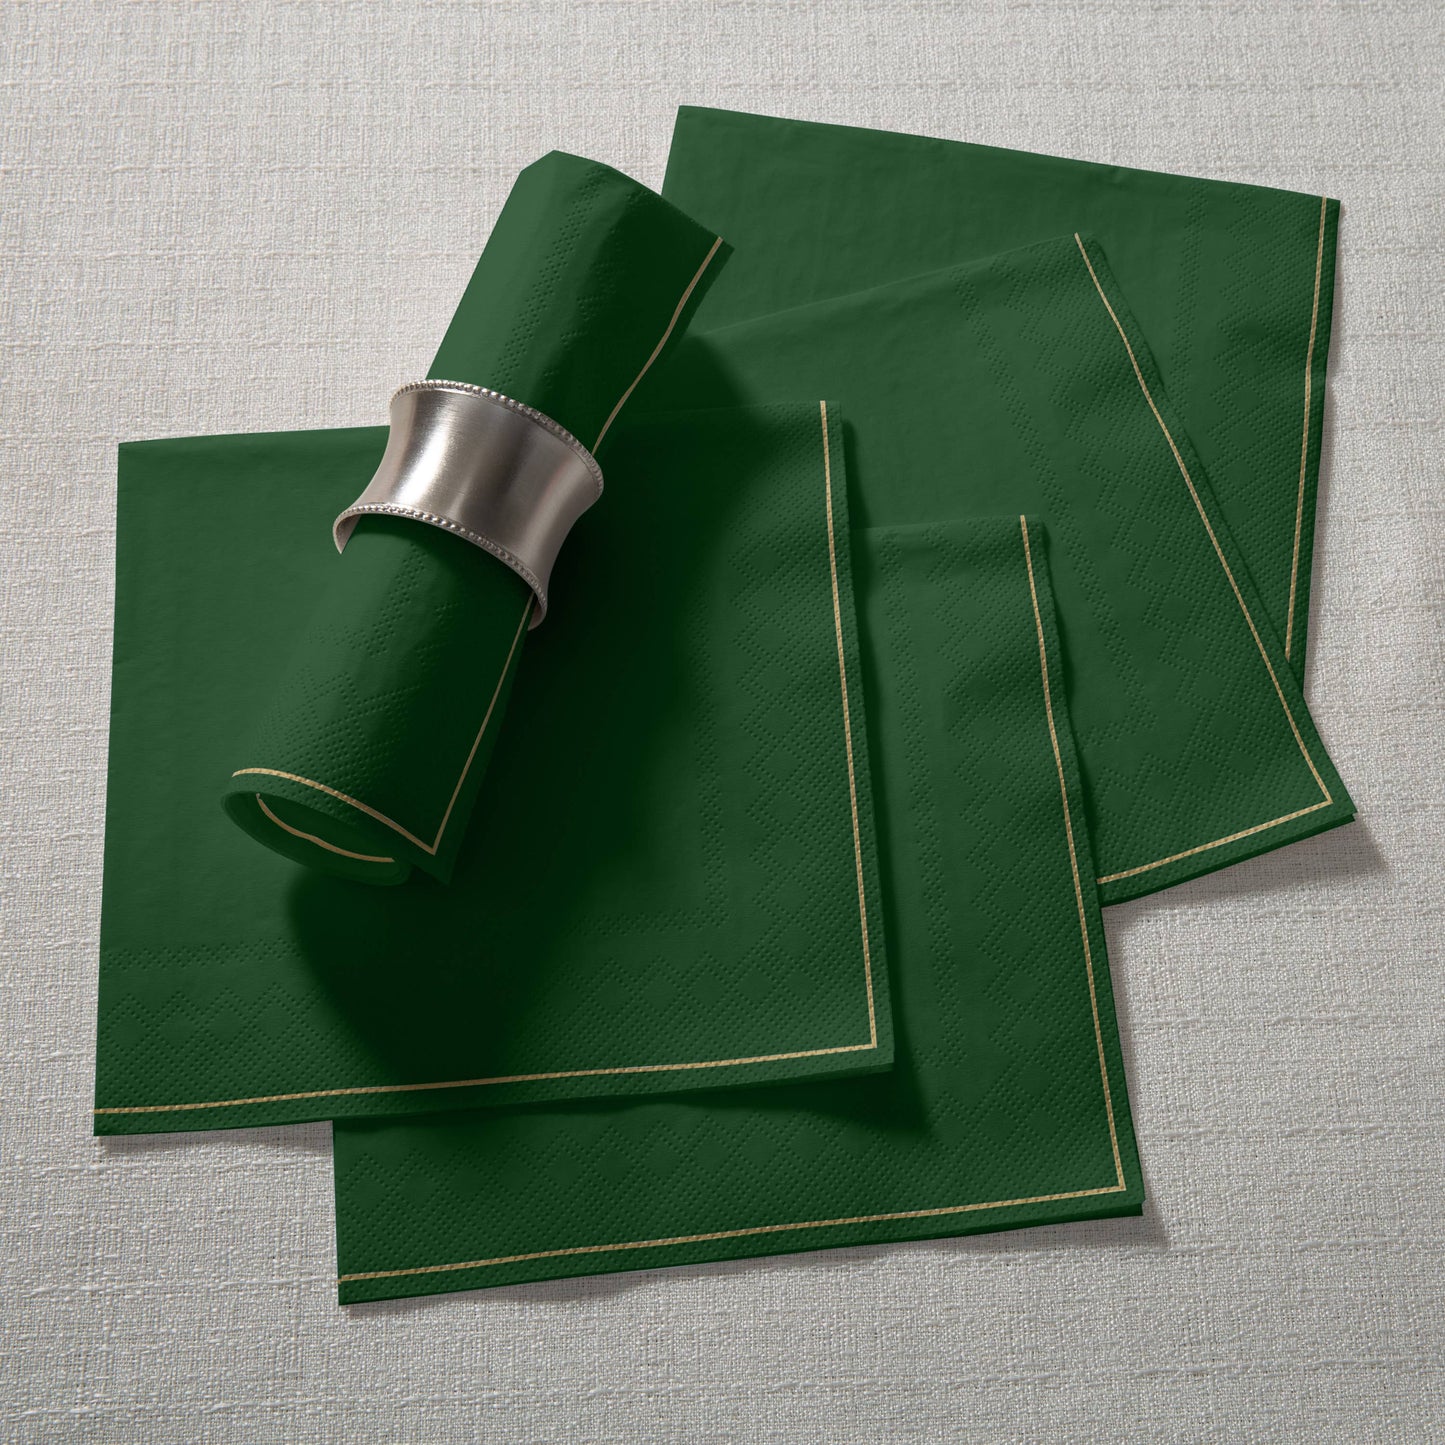 Emerald with Gold Stripe Lunch Napkins | 20 Napkins: 20 Lunch Napkins - 6.5" x 6.5"